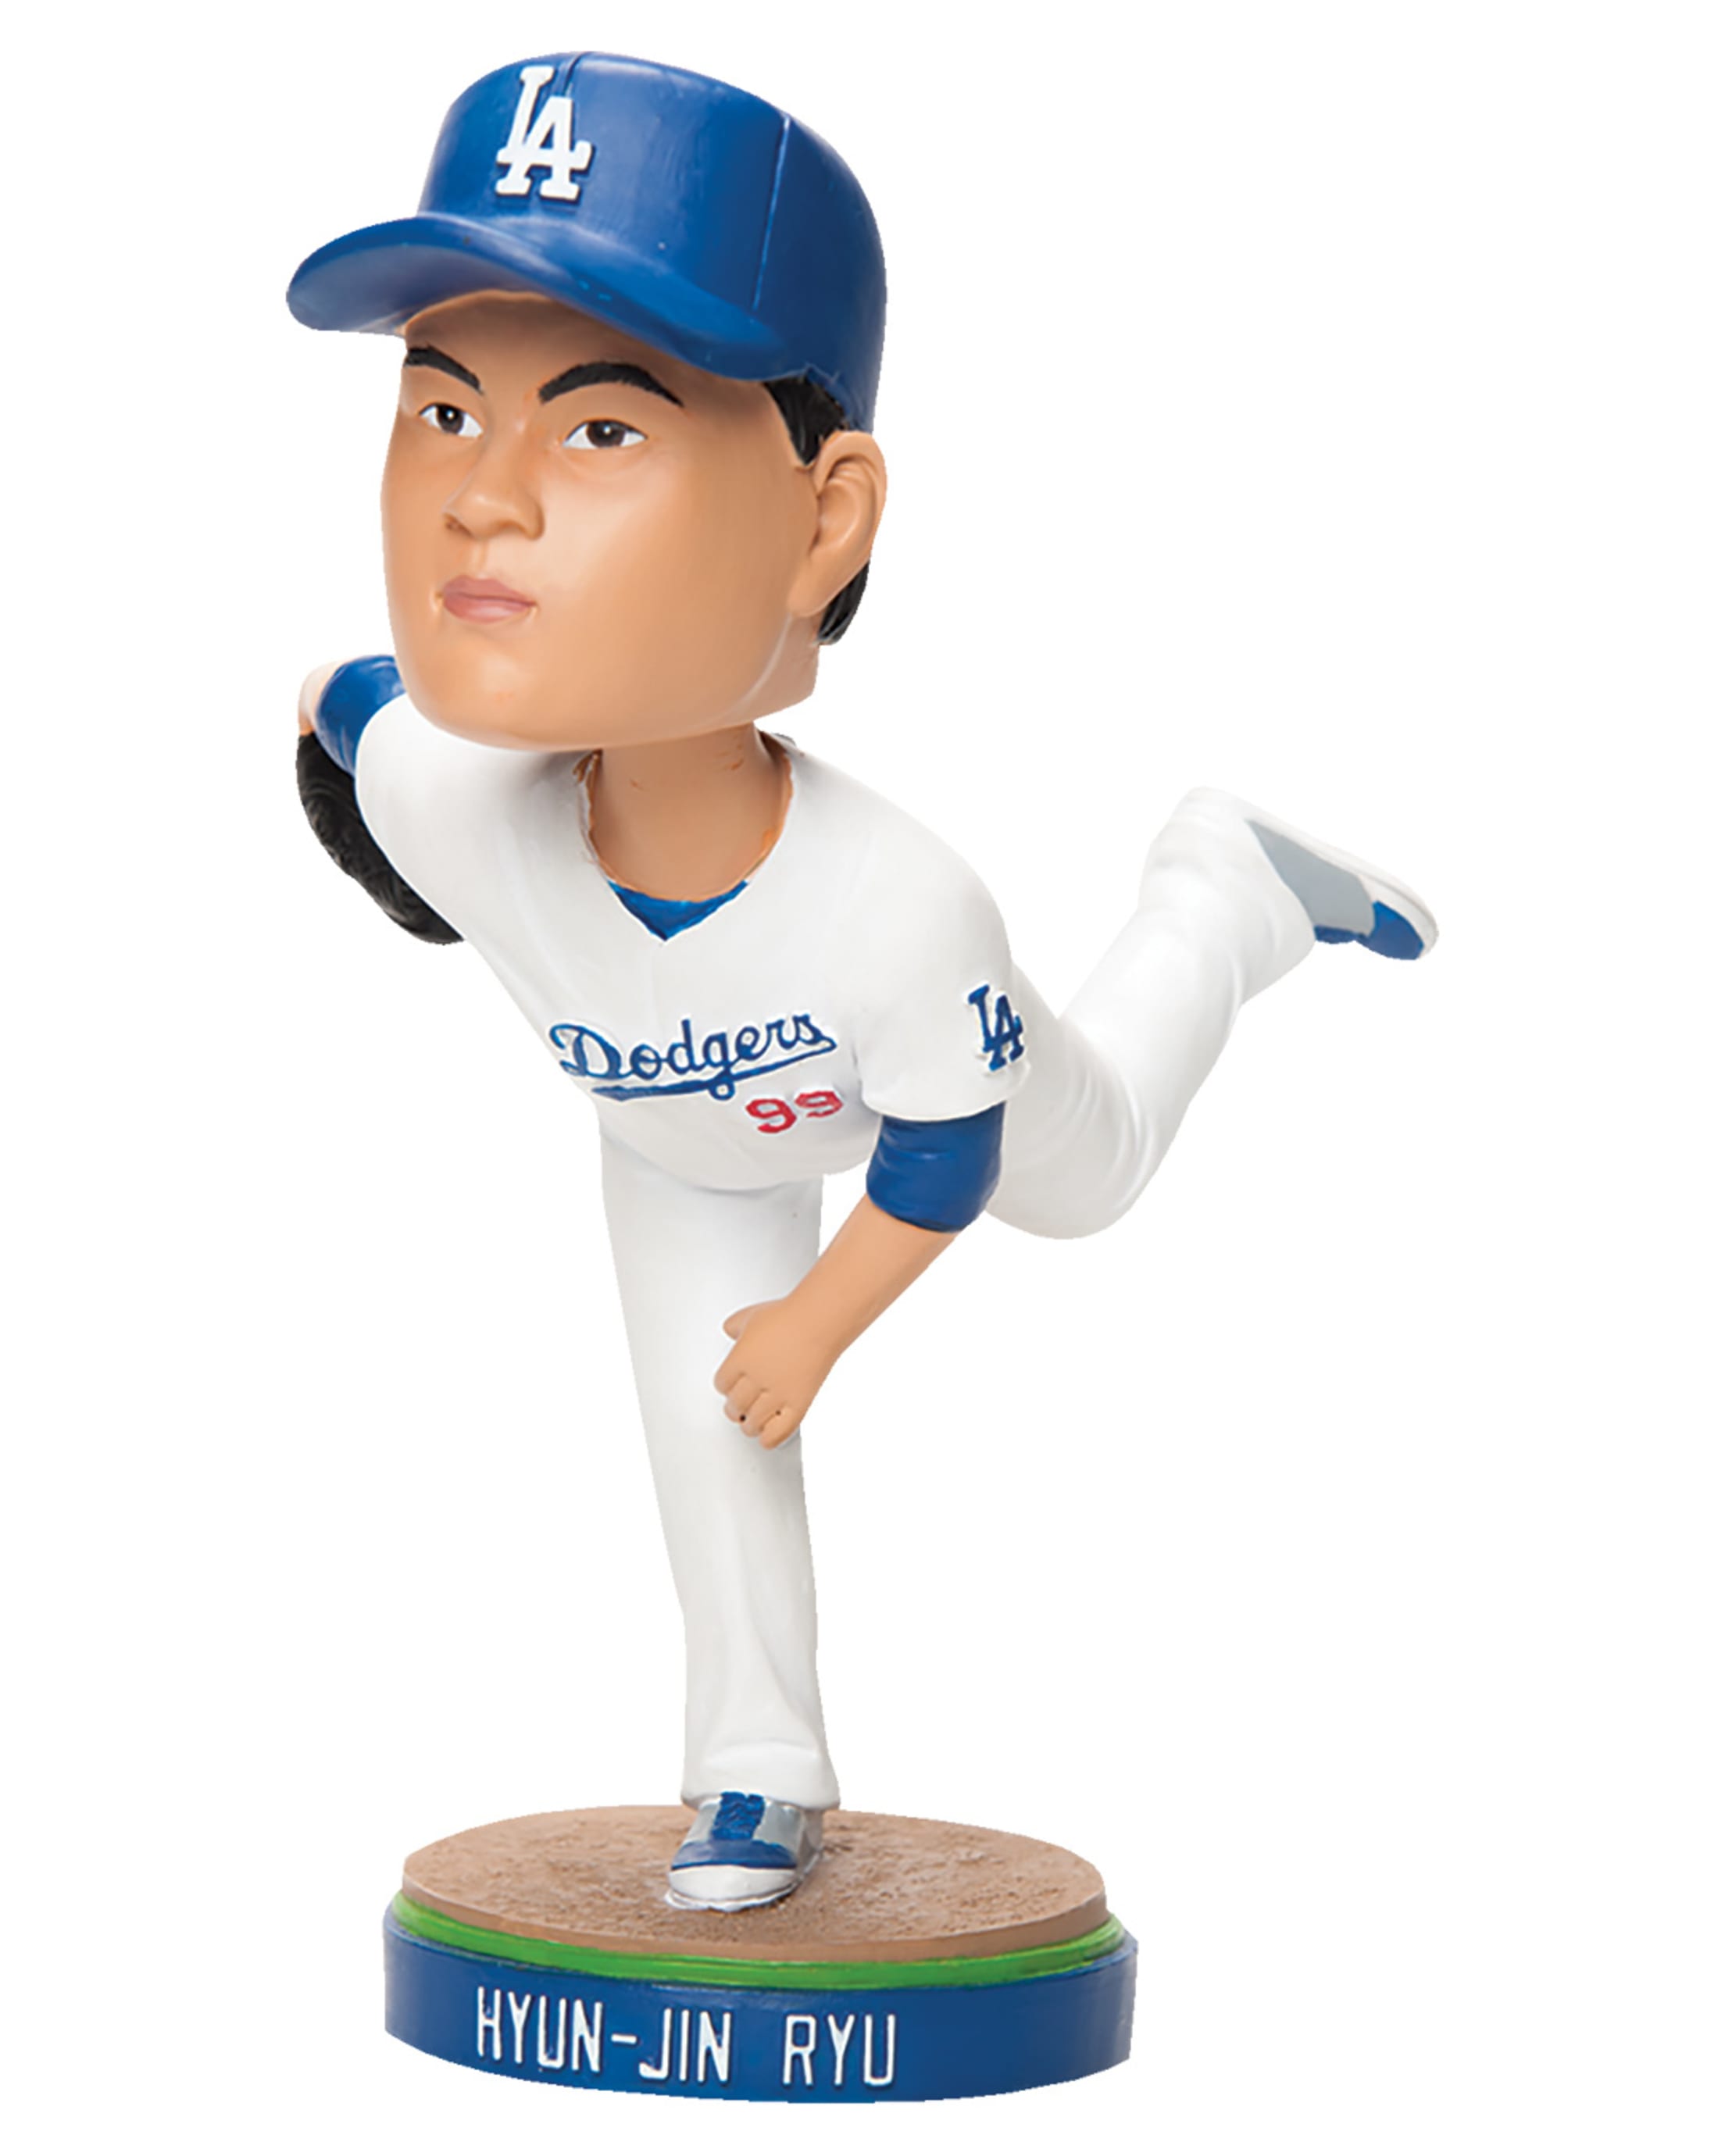 Dodgers announce 2014 promotional schedule, including bobbleheads